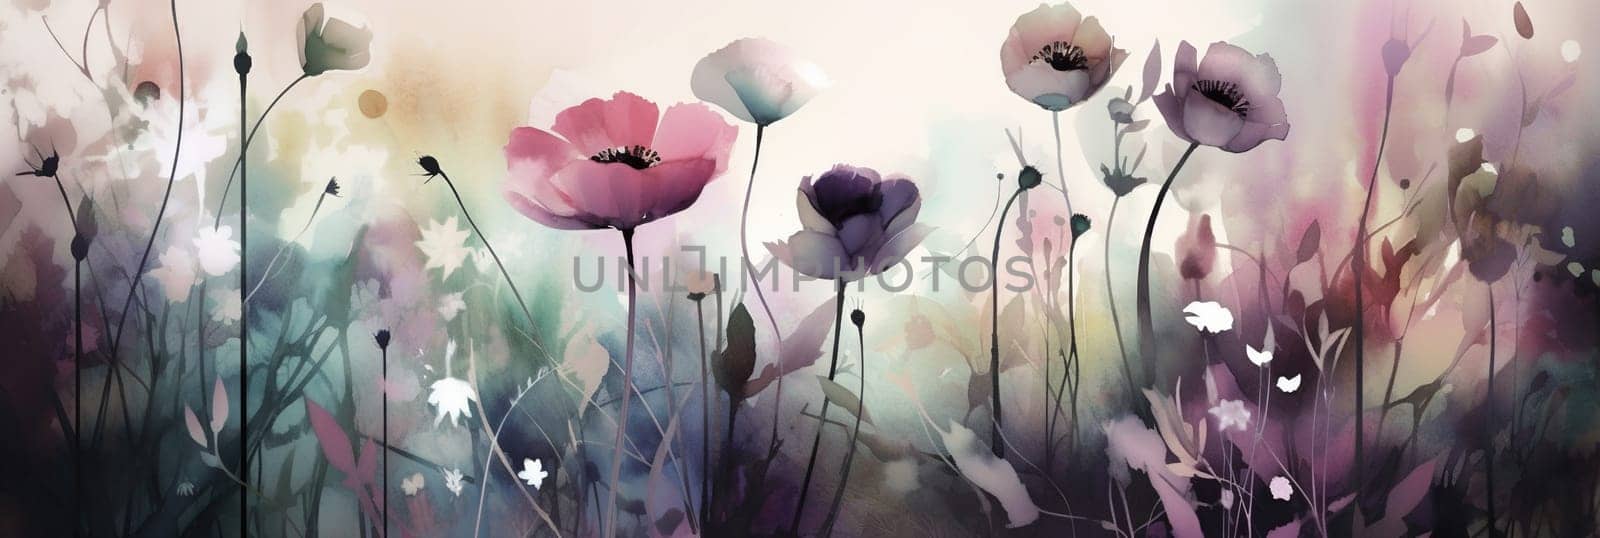 Floral Watercolor Background. Springtime Poppy Flowers Artistic Beautiful Banner. Tender Florals Watercolor Wallpaper Texture. by iliris